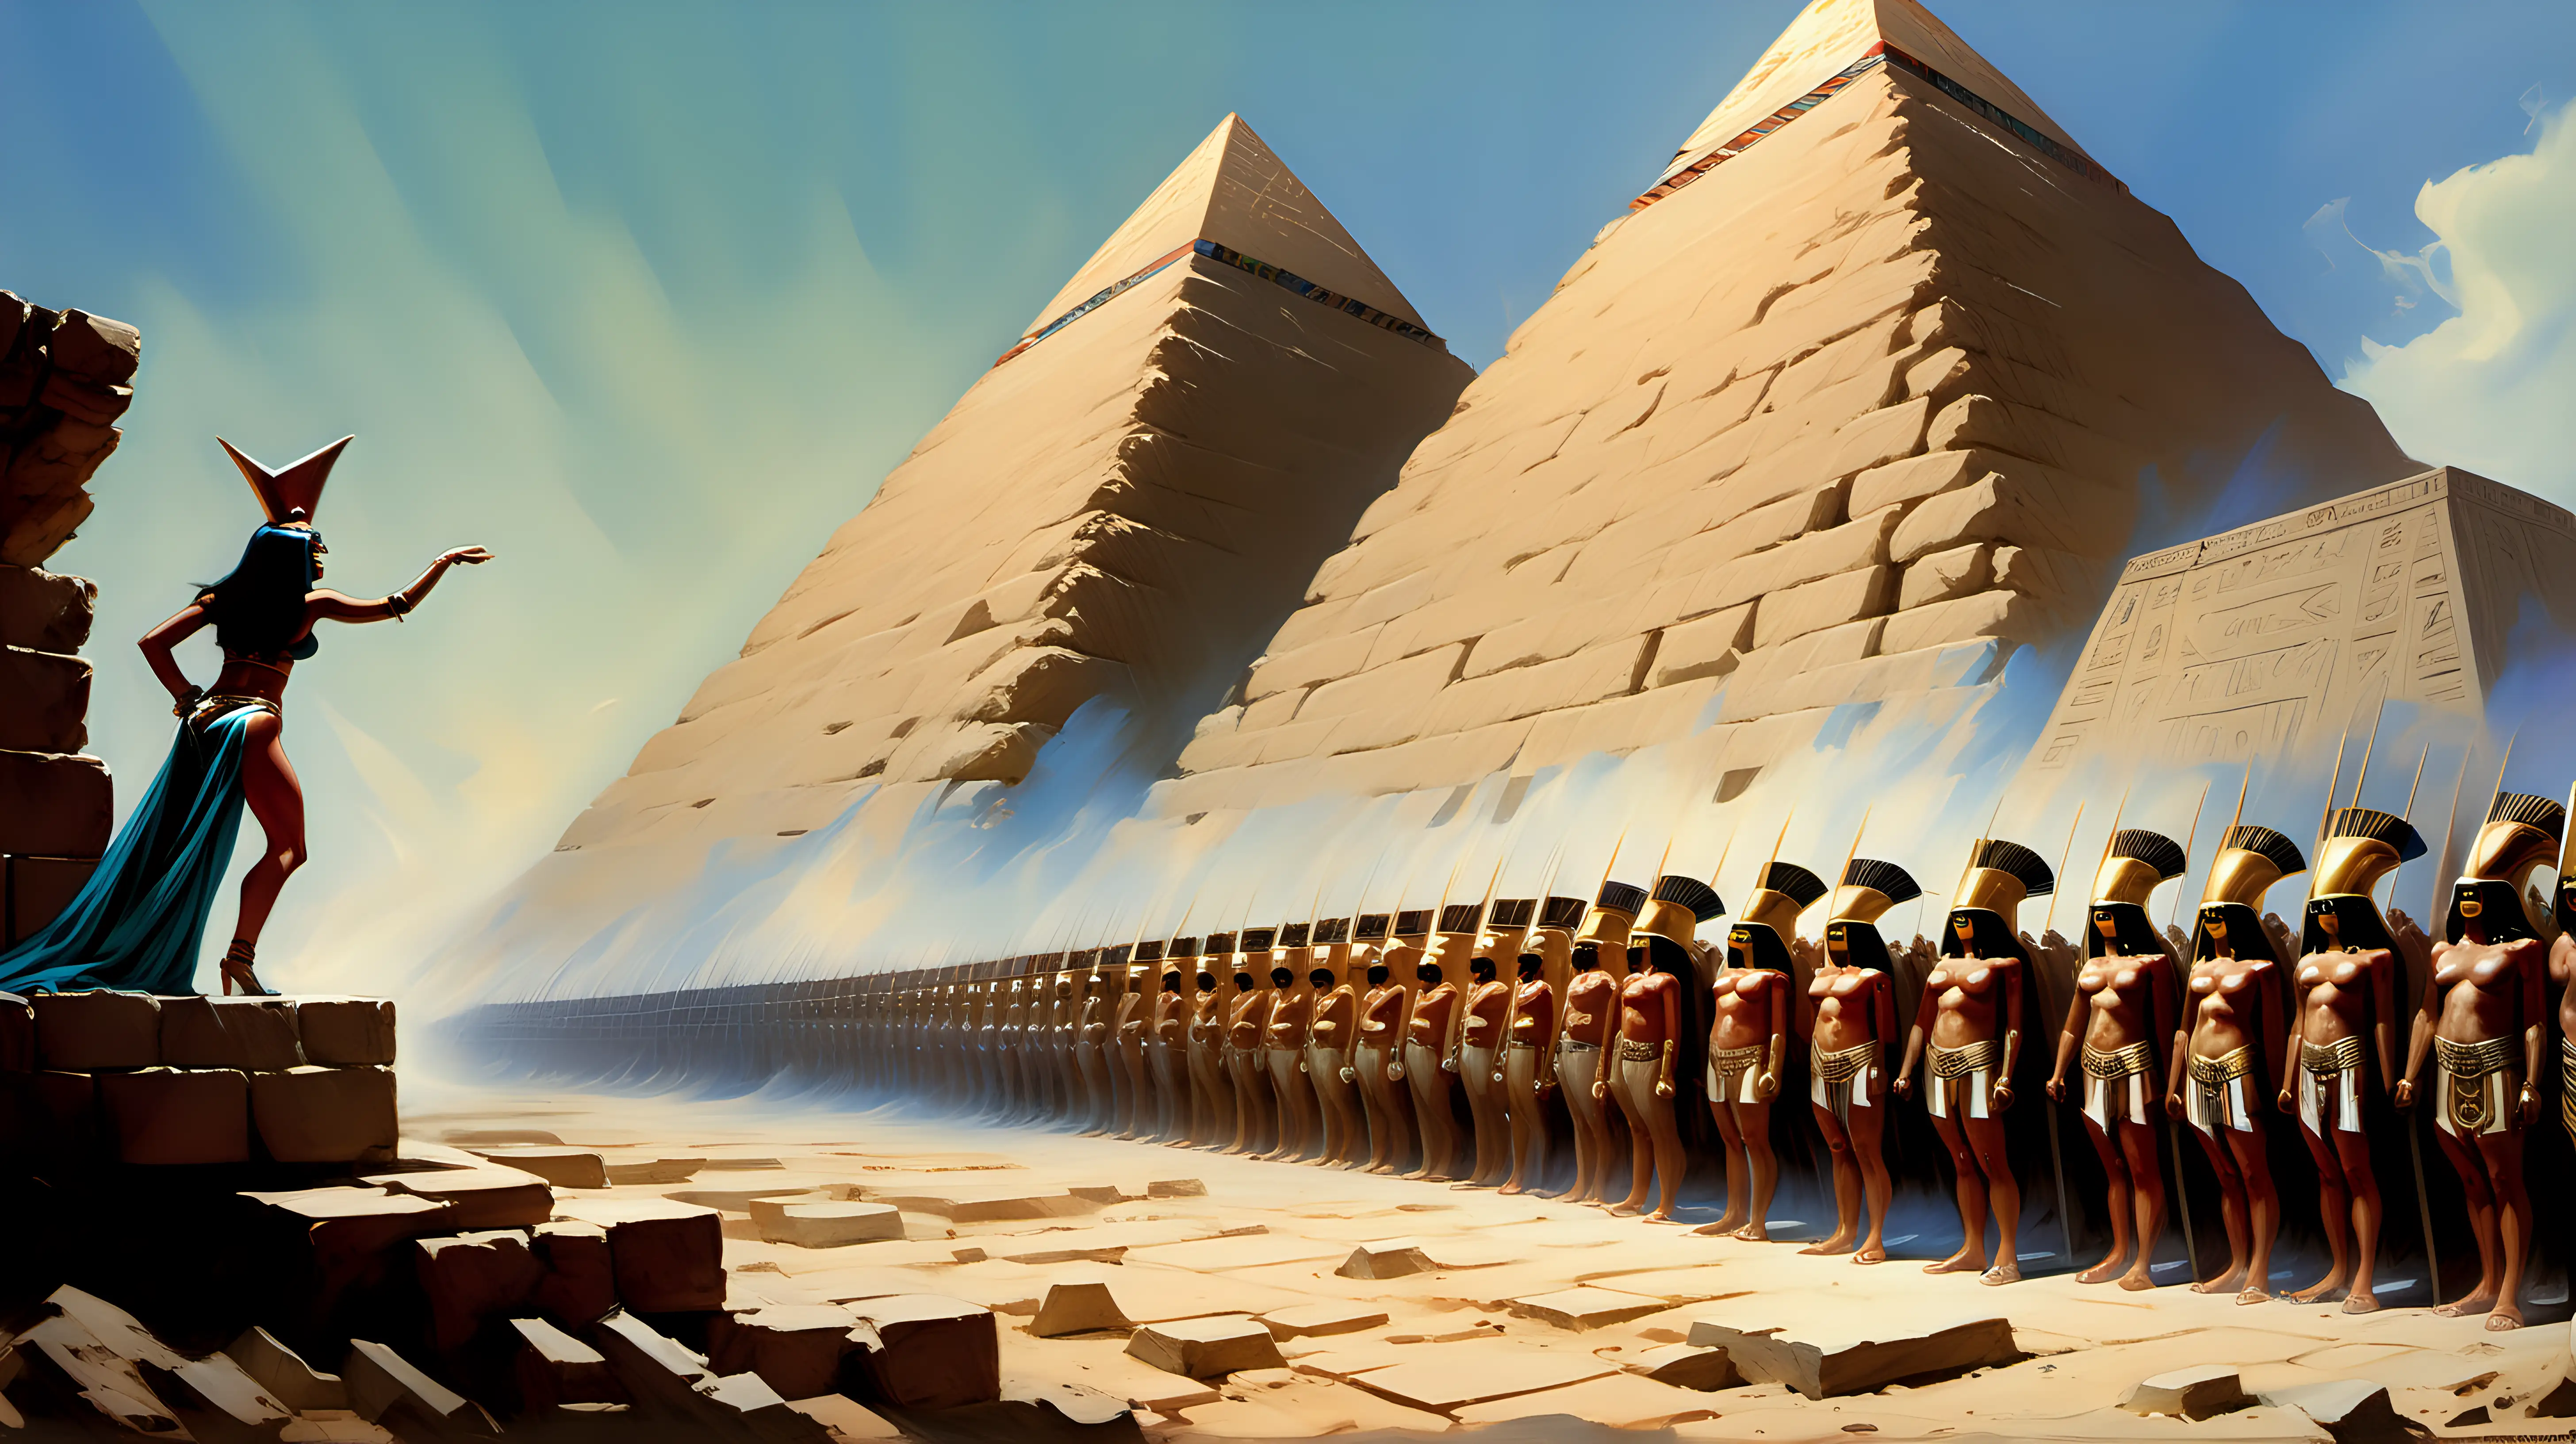 Donald Trump with Cleopatra building a big wall around the  Egyptian pyramids wide angle shot Frank Frazetta style